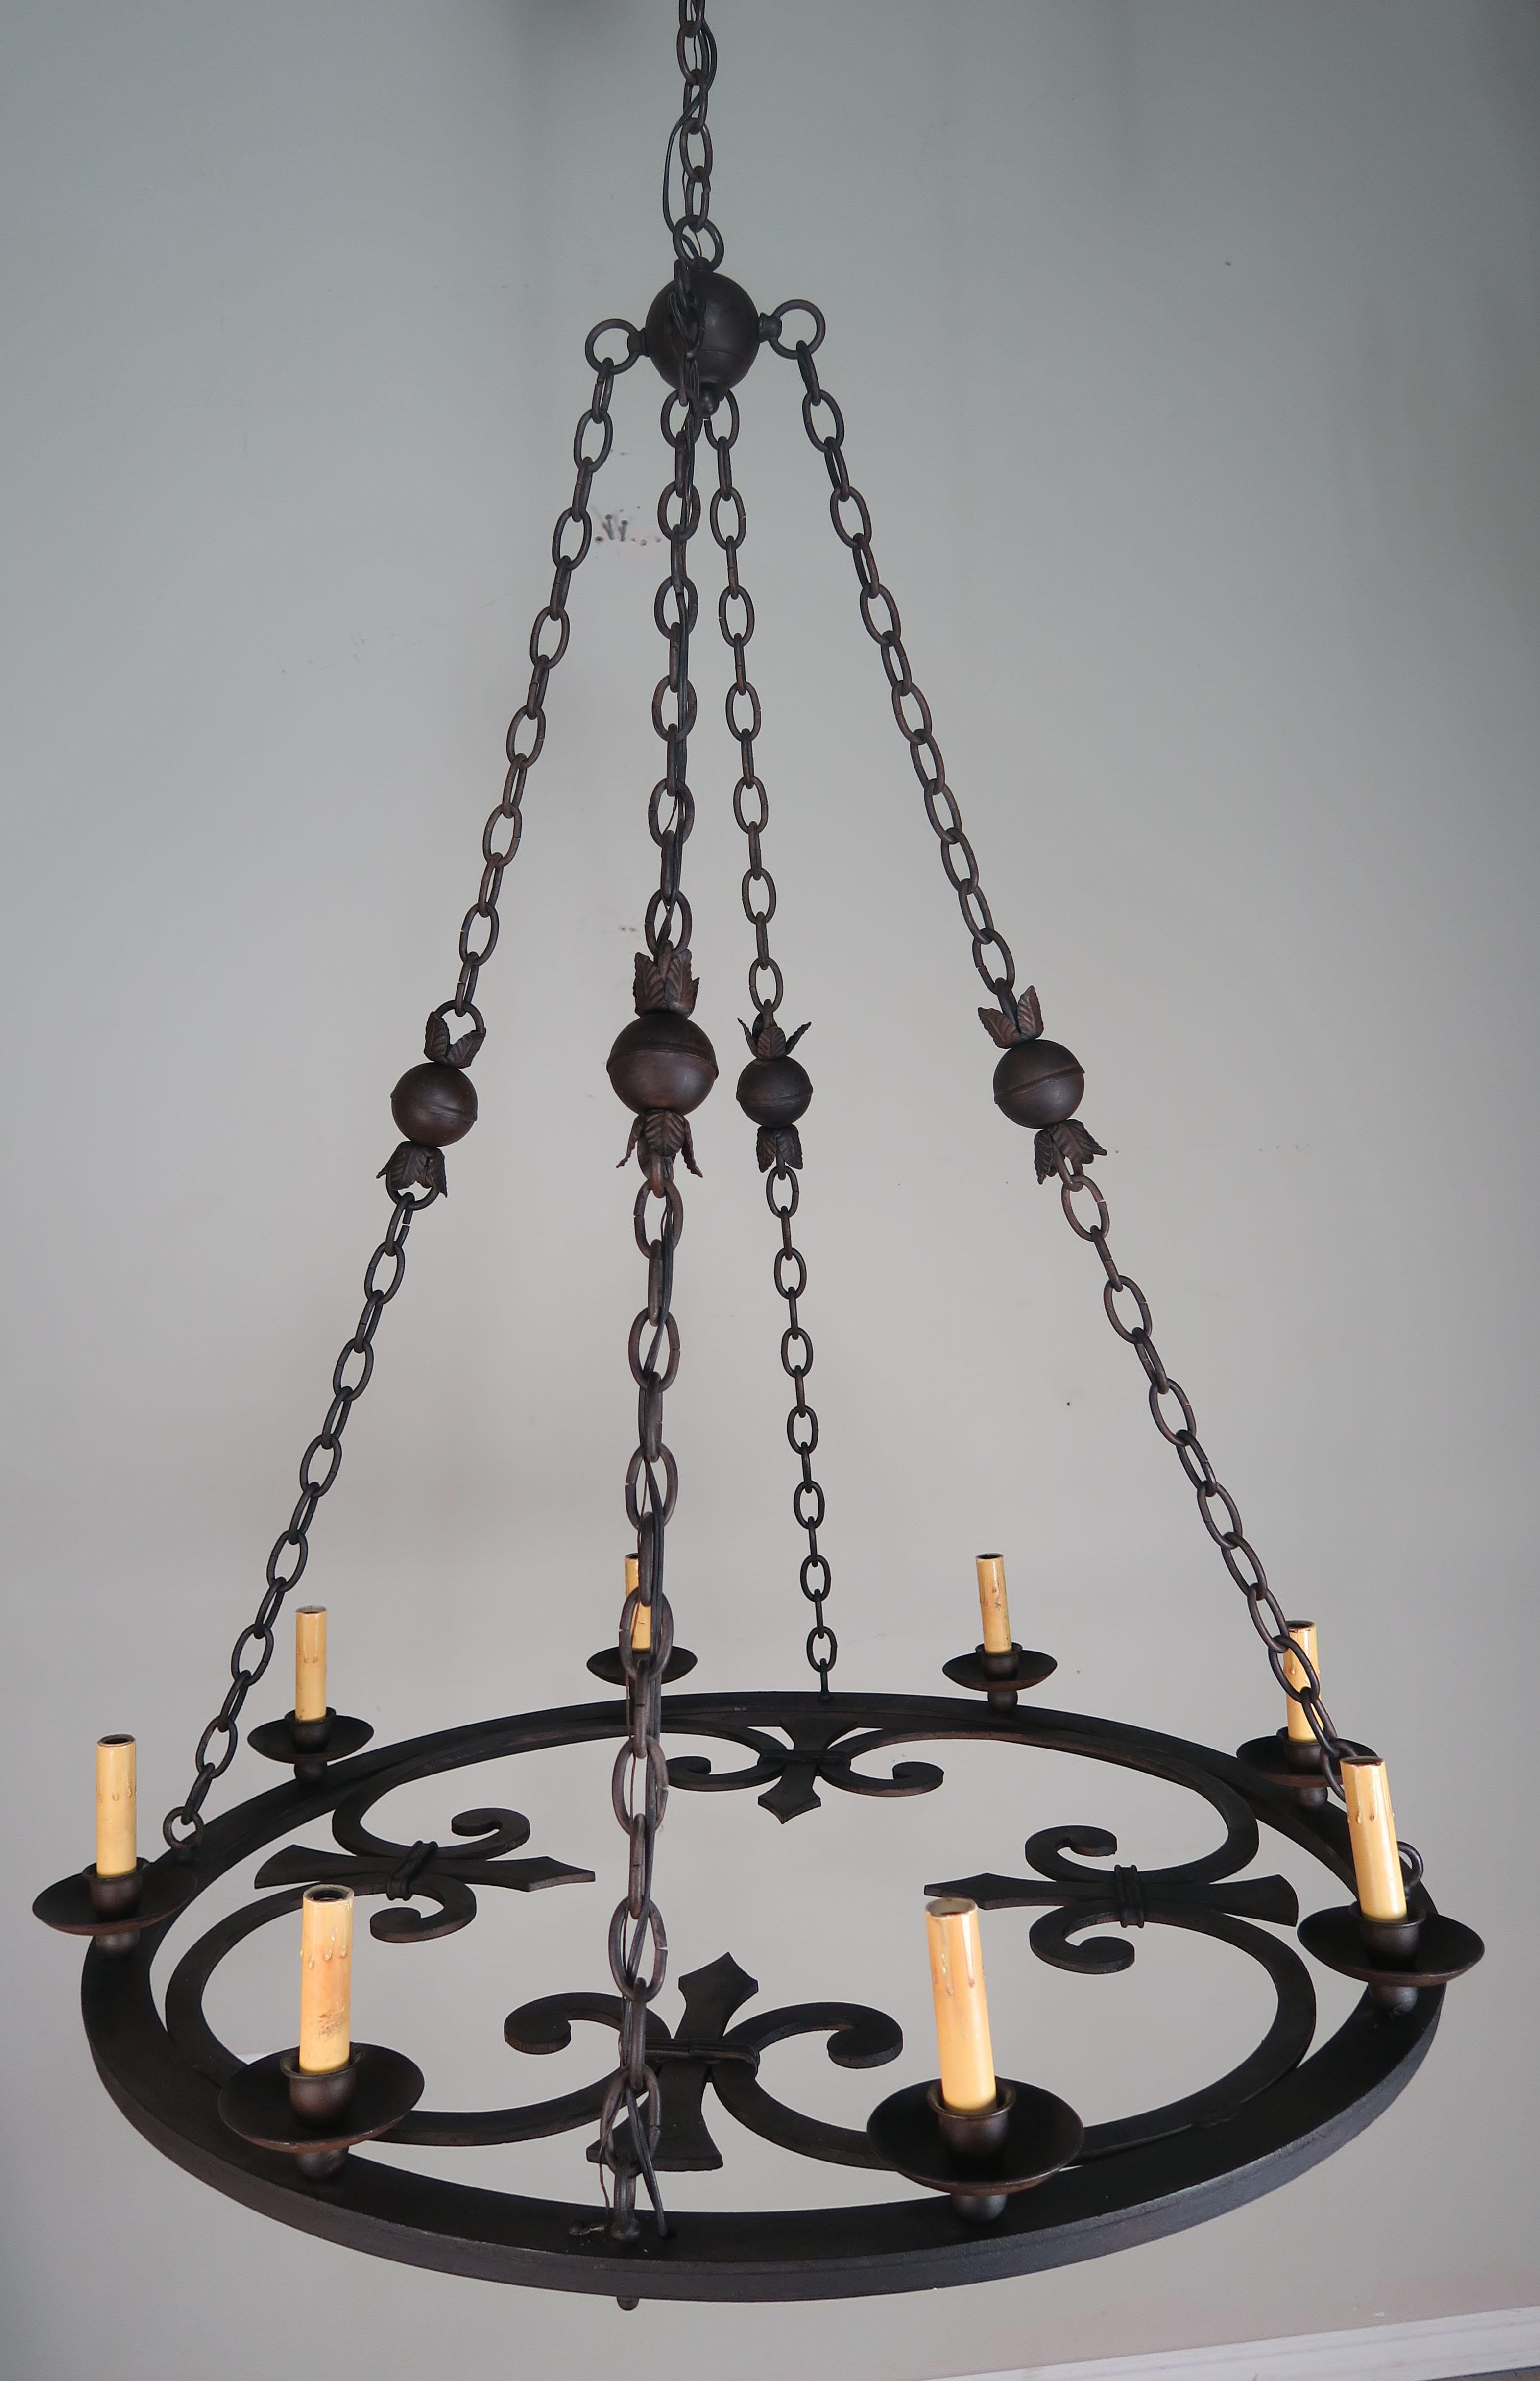 Eight-light Spanish wrought Iron circular shaped chandelier with four fleur de lys. The chandelier is attached to three chains that meet at a center iron ball and then extends up to the canopy. More chain available if needed. The fixture has been